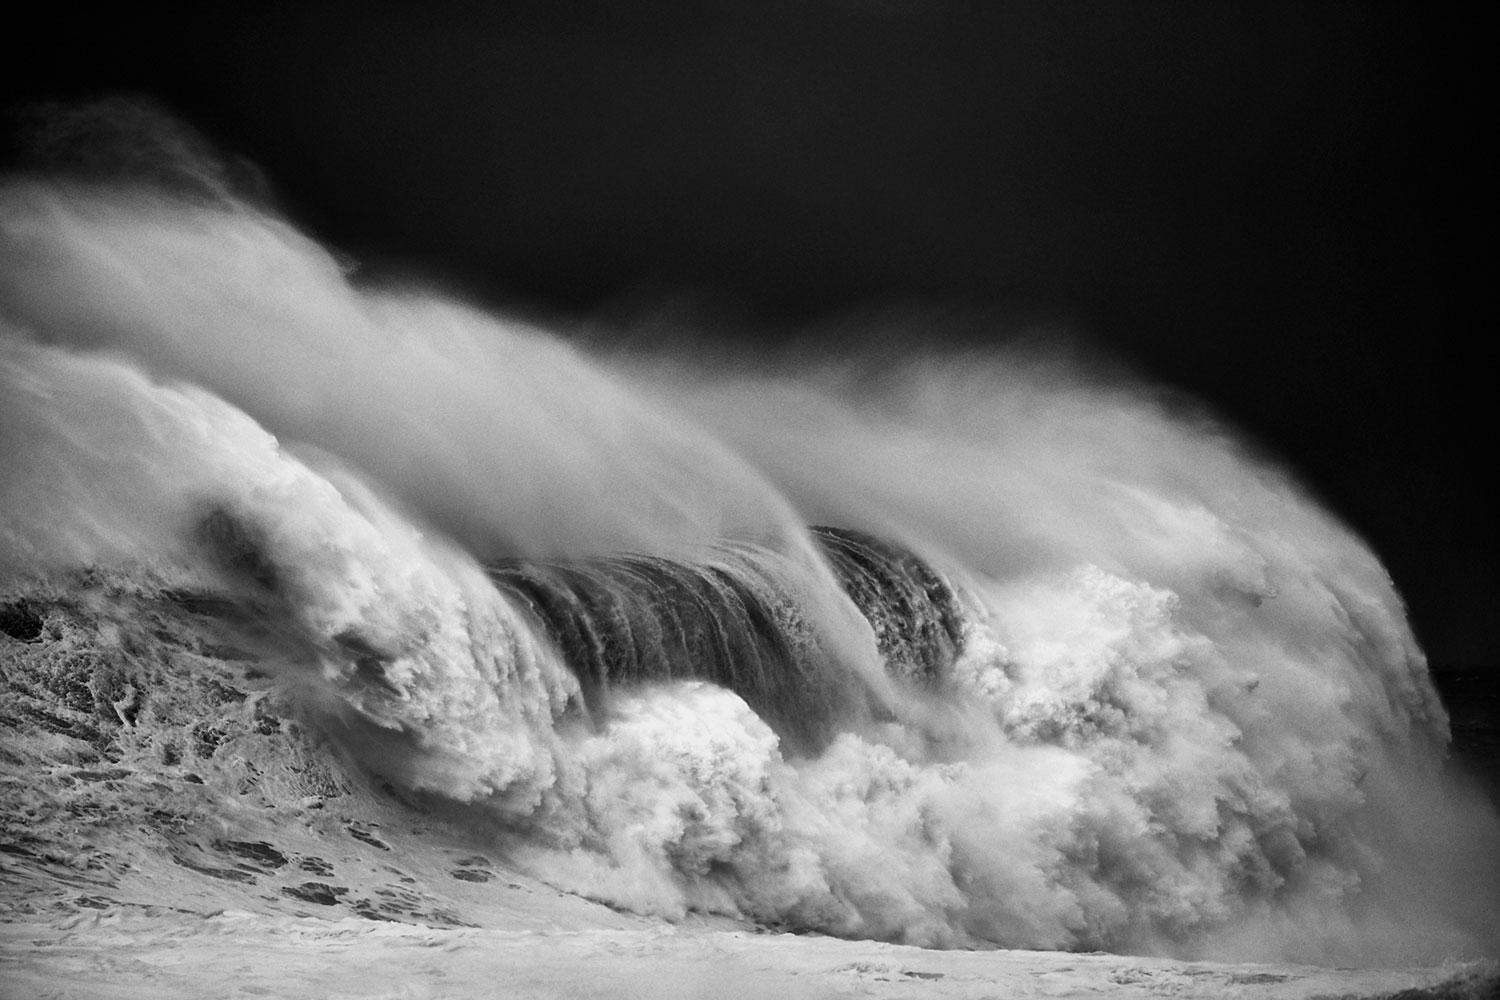 Alessandro Puccinelli Abstract Photograph - Nazare, Portugal, Waves, Seascape Photography